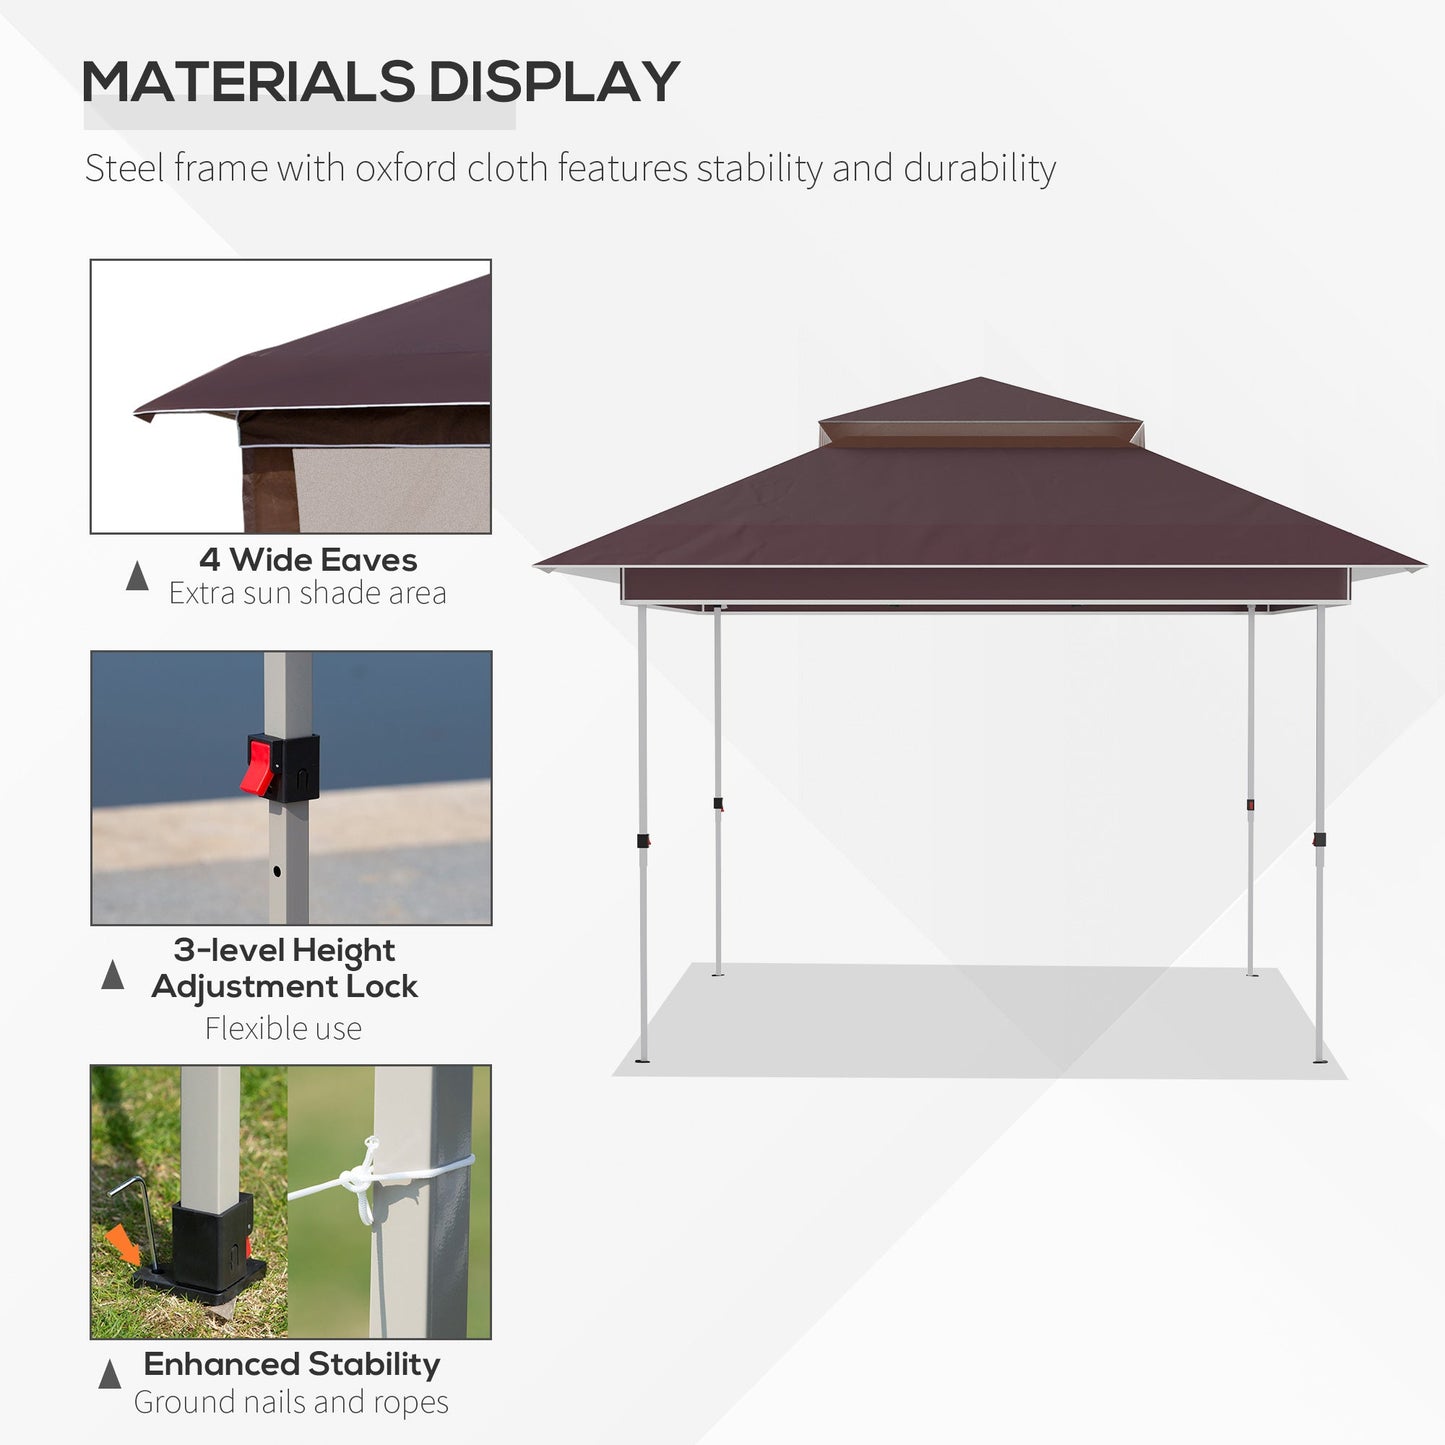 -Outsunny 12' x 12' Pop Up Canopy Sun Shade Instant Tent Folding with Mesh Sidewall Netting, 3-Level Adjustable Height and Storage Bag, Brown - Outdoor Style Company